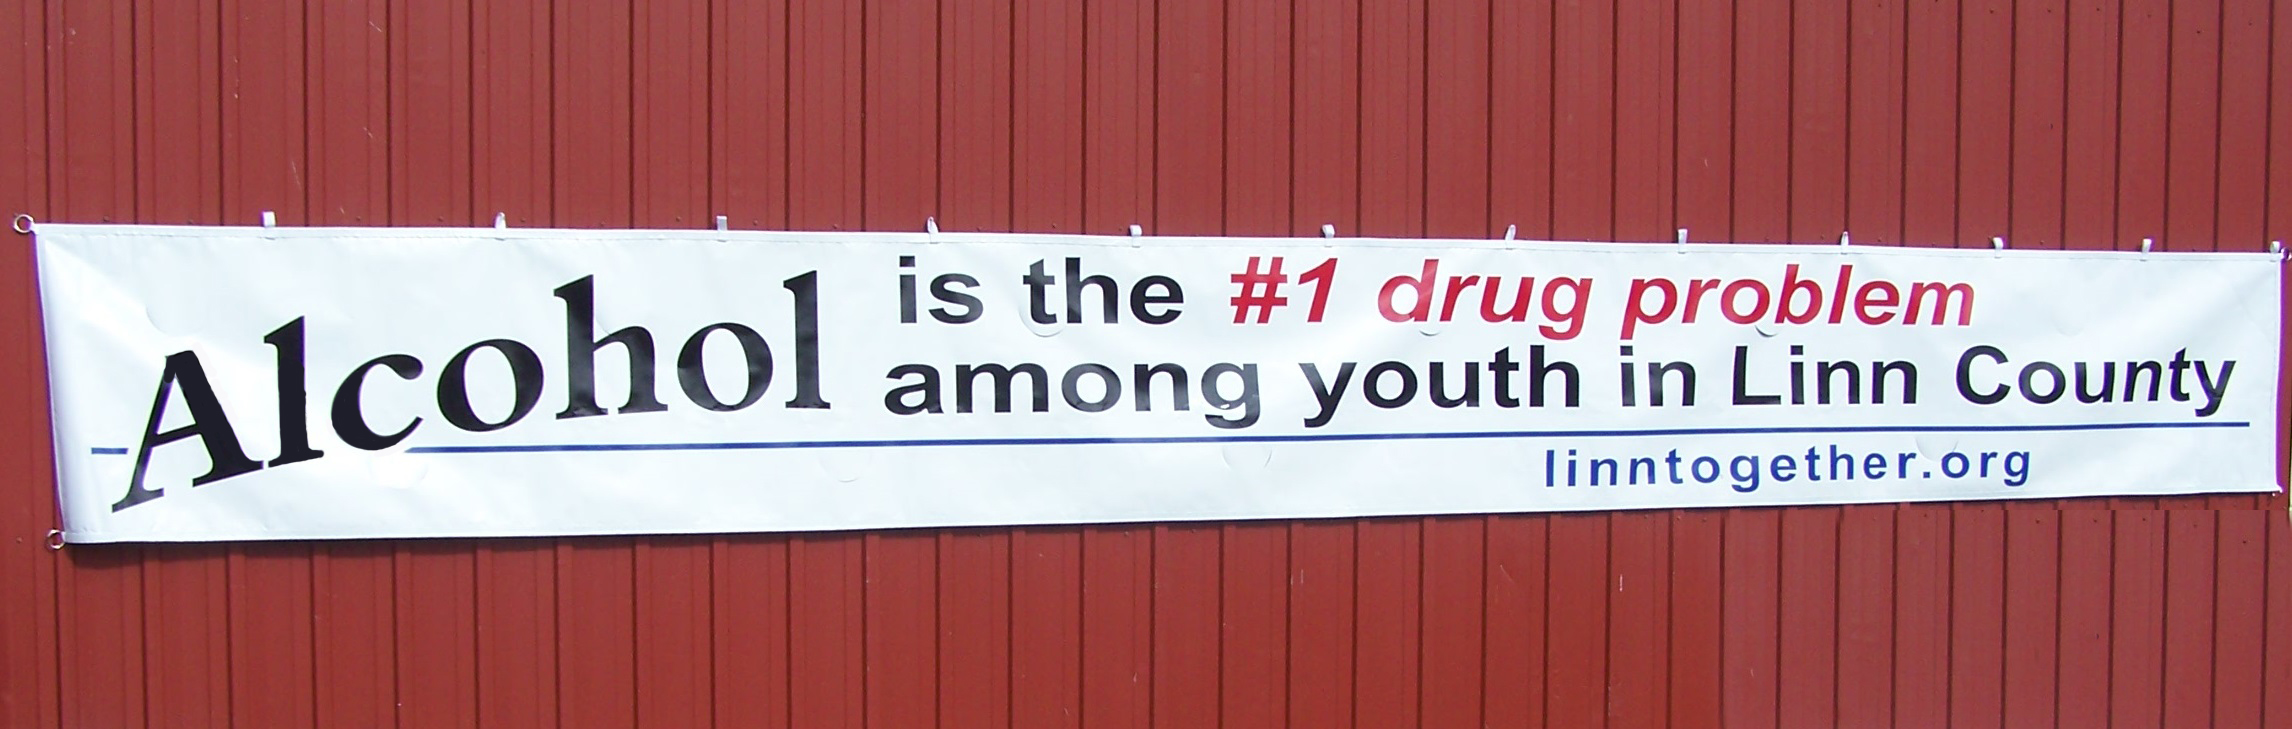 Alcohol Abuse banner by Bason Signs